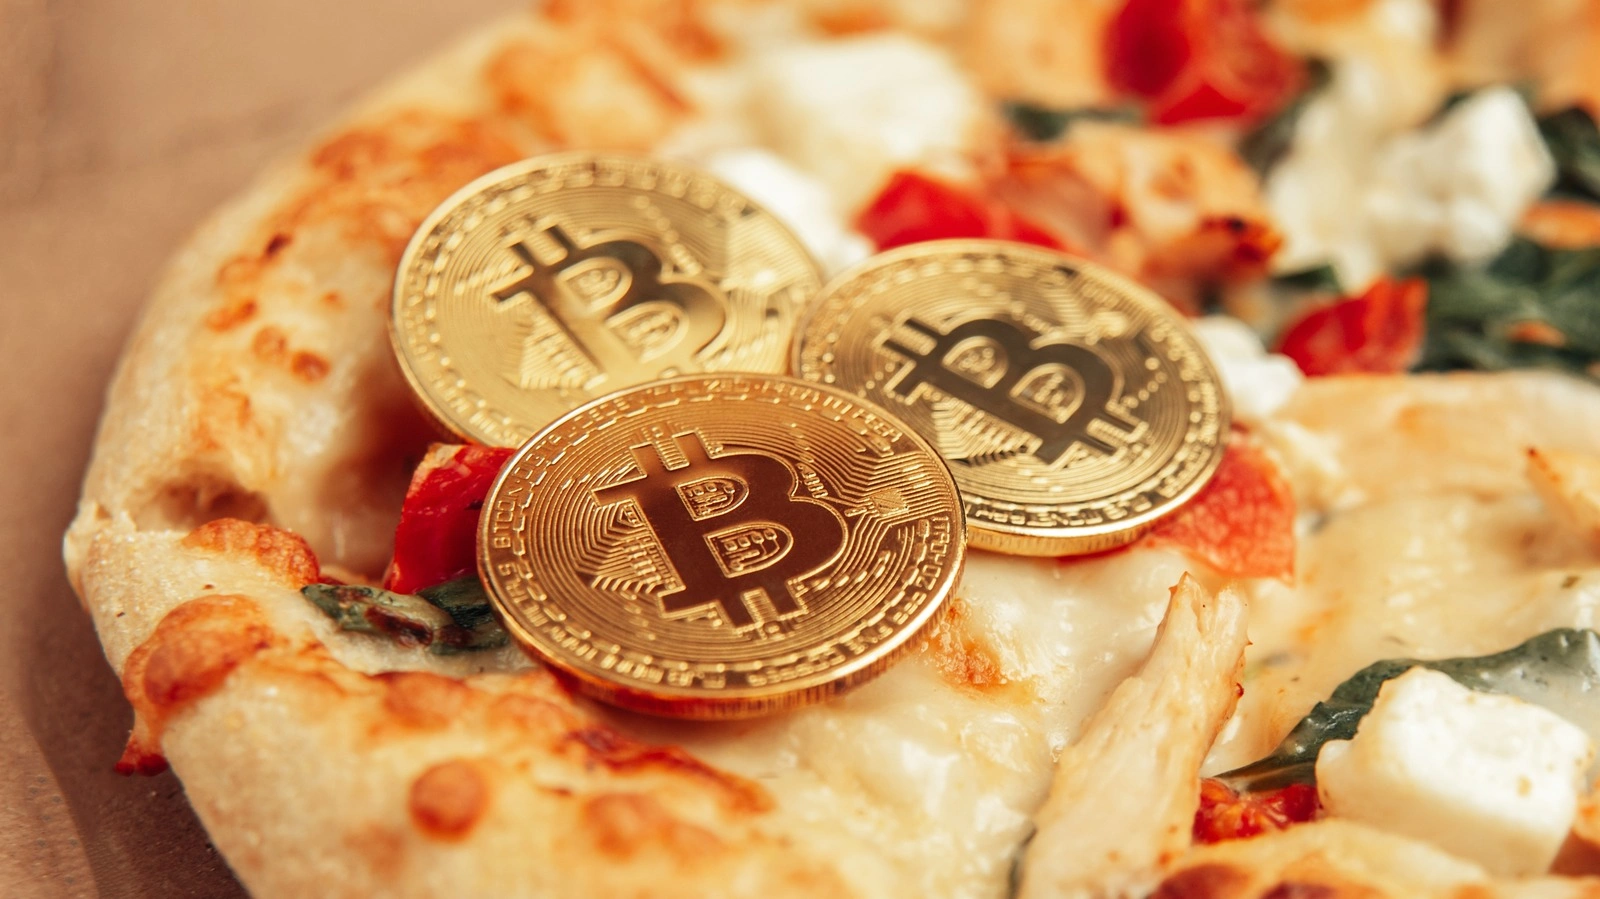 How Is Bitcoin Pizza Day A Day Of Celebration?